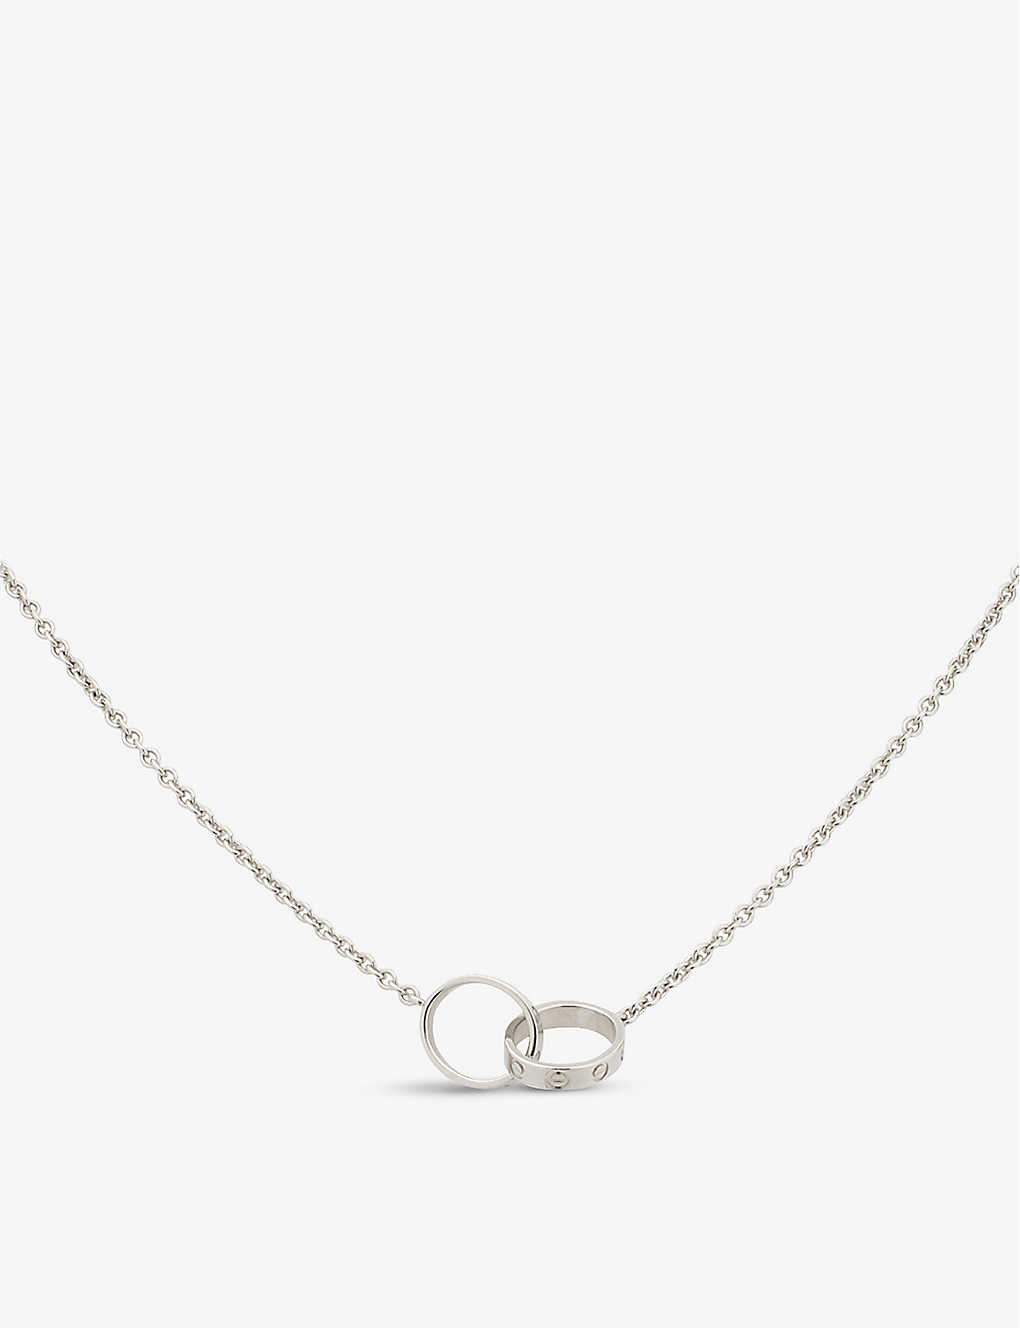 Cartier Love 18ct White-gold Necklace